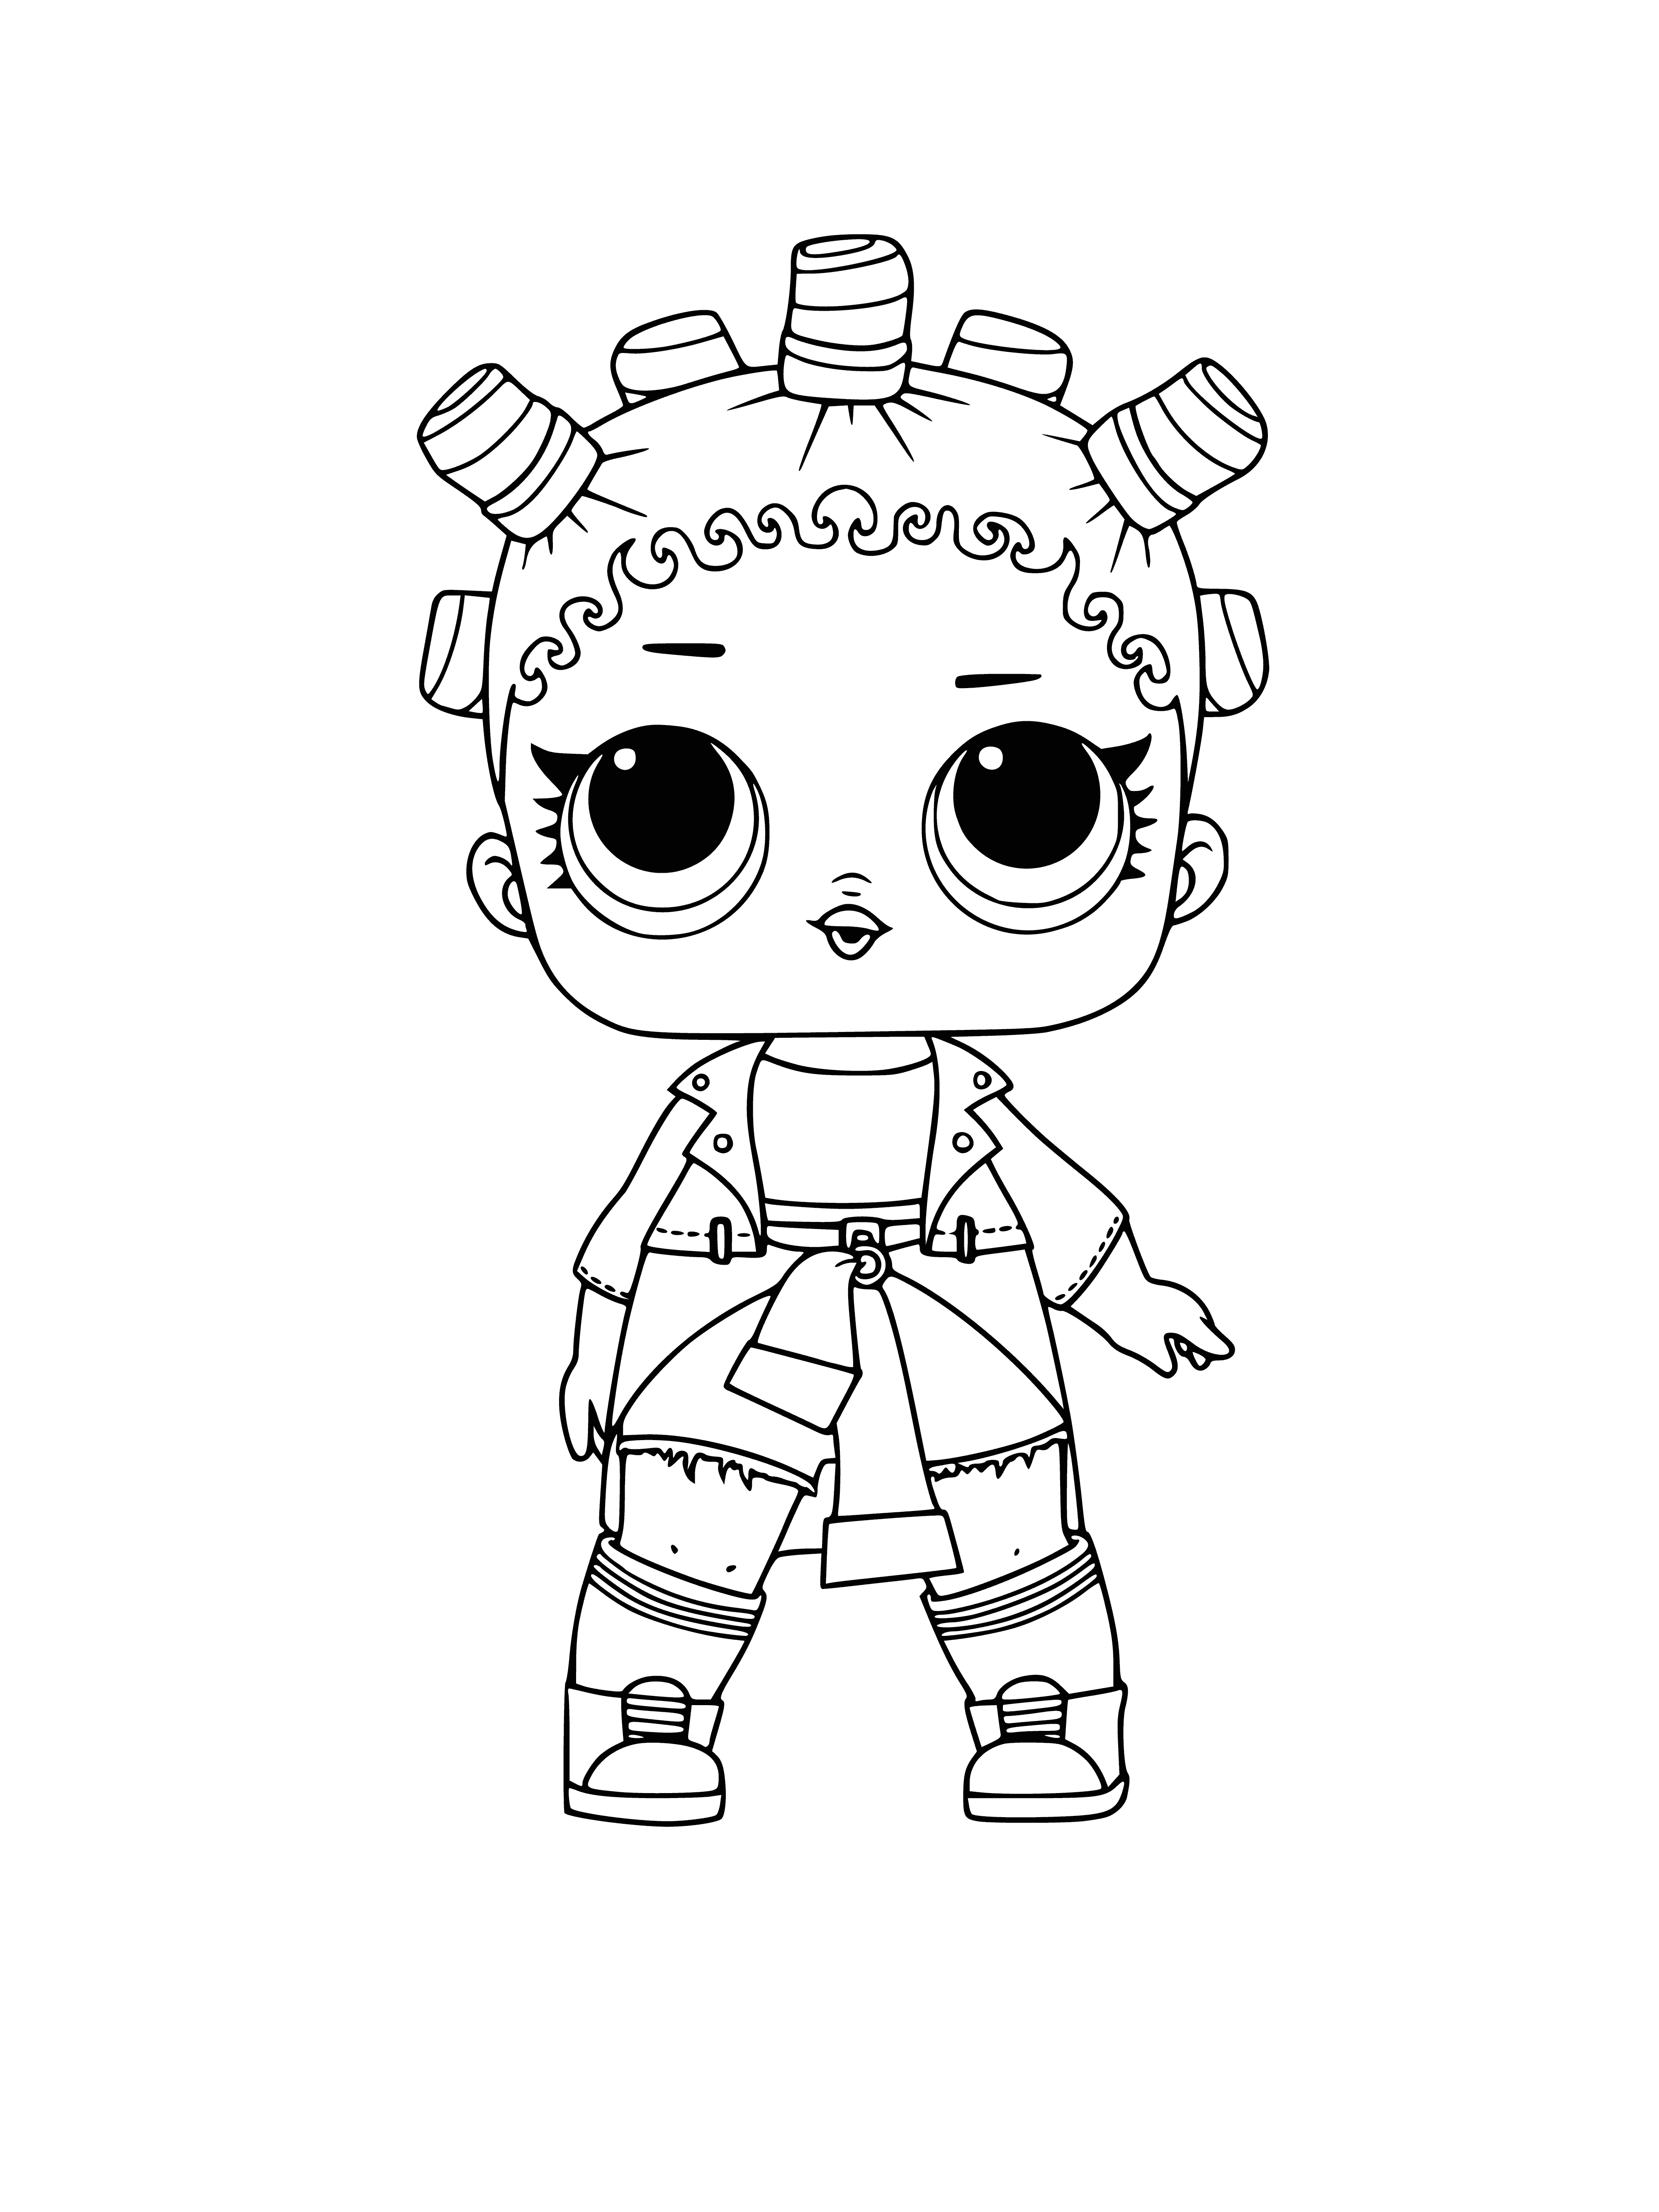 LOL doll Fresh series 1 coloring page